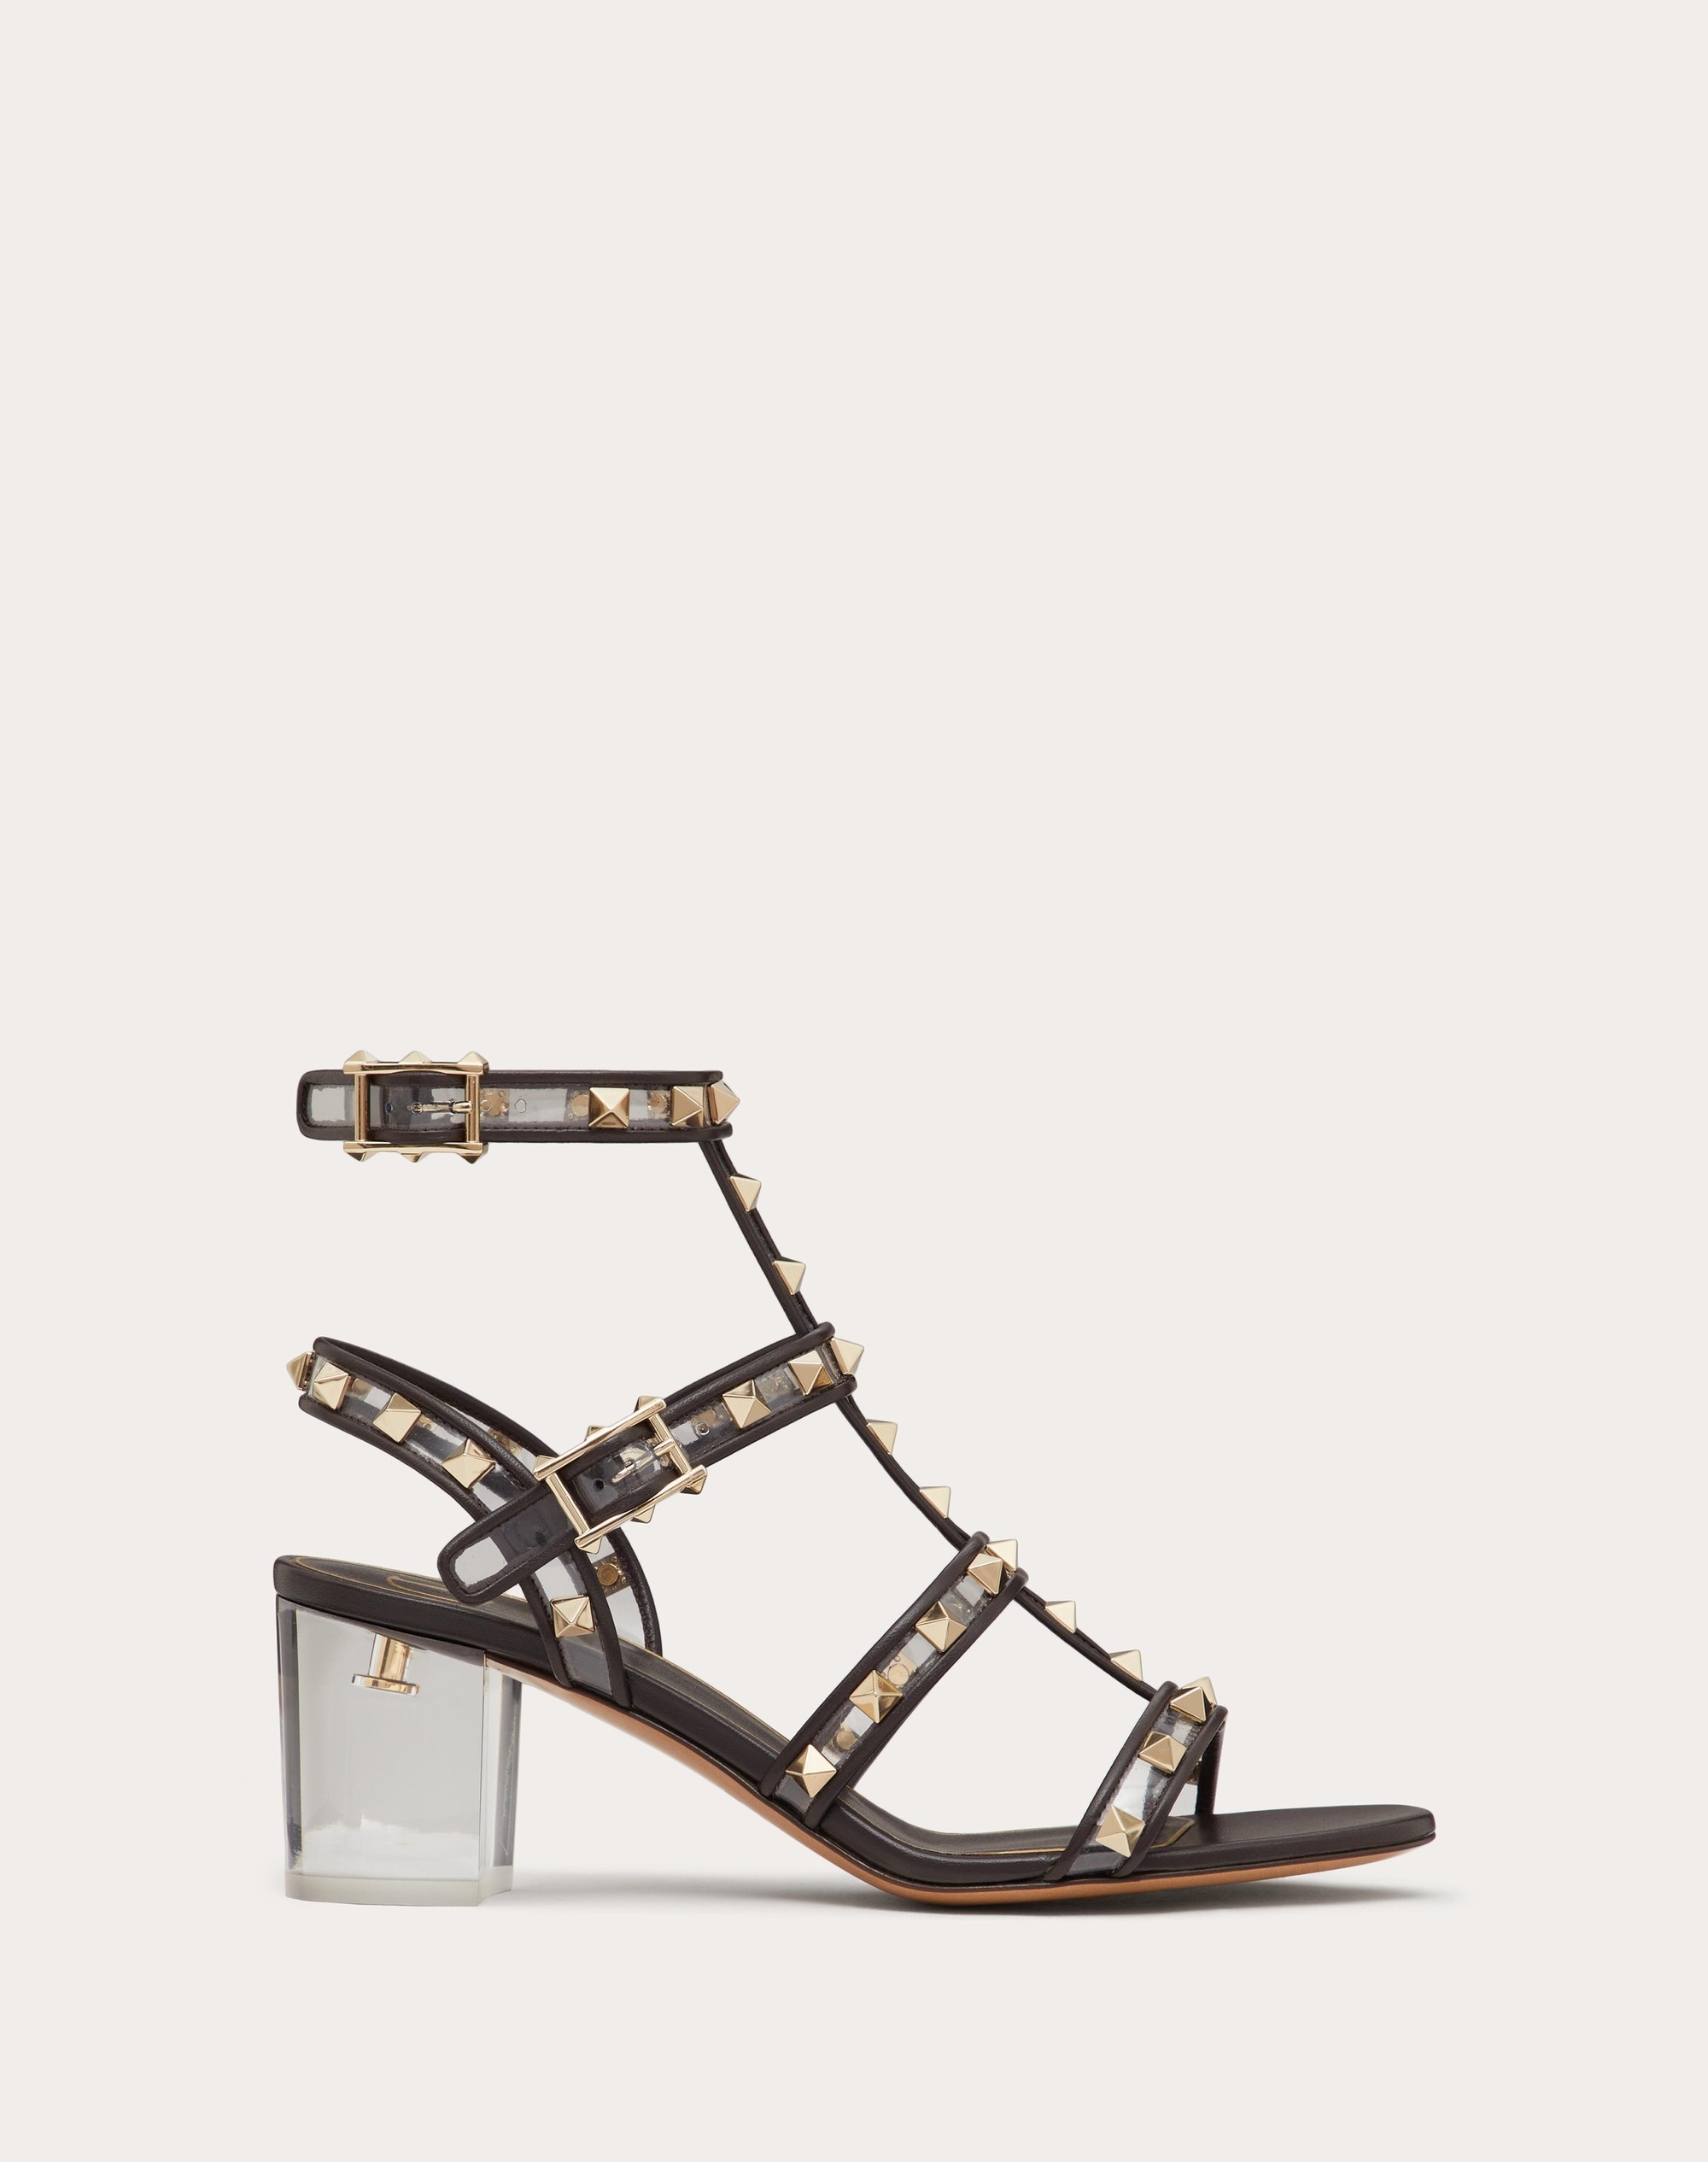 ROCKSTUD SANDAL IN POLYMER MATERIAL WITH STRAPS AND PLEXI HEEL 60MM - 1